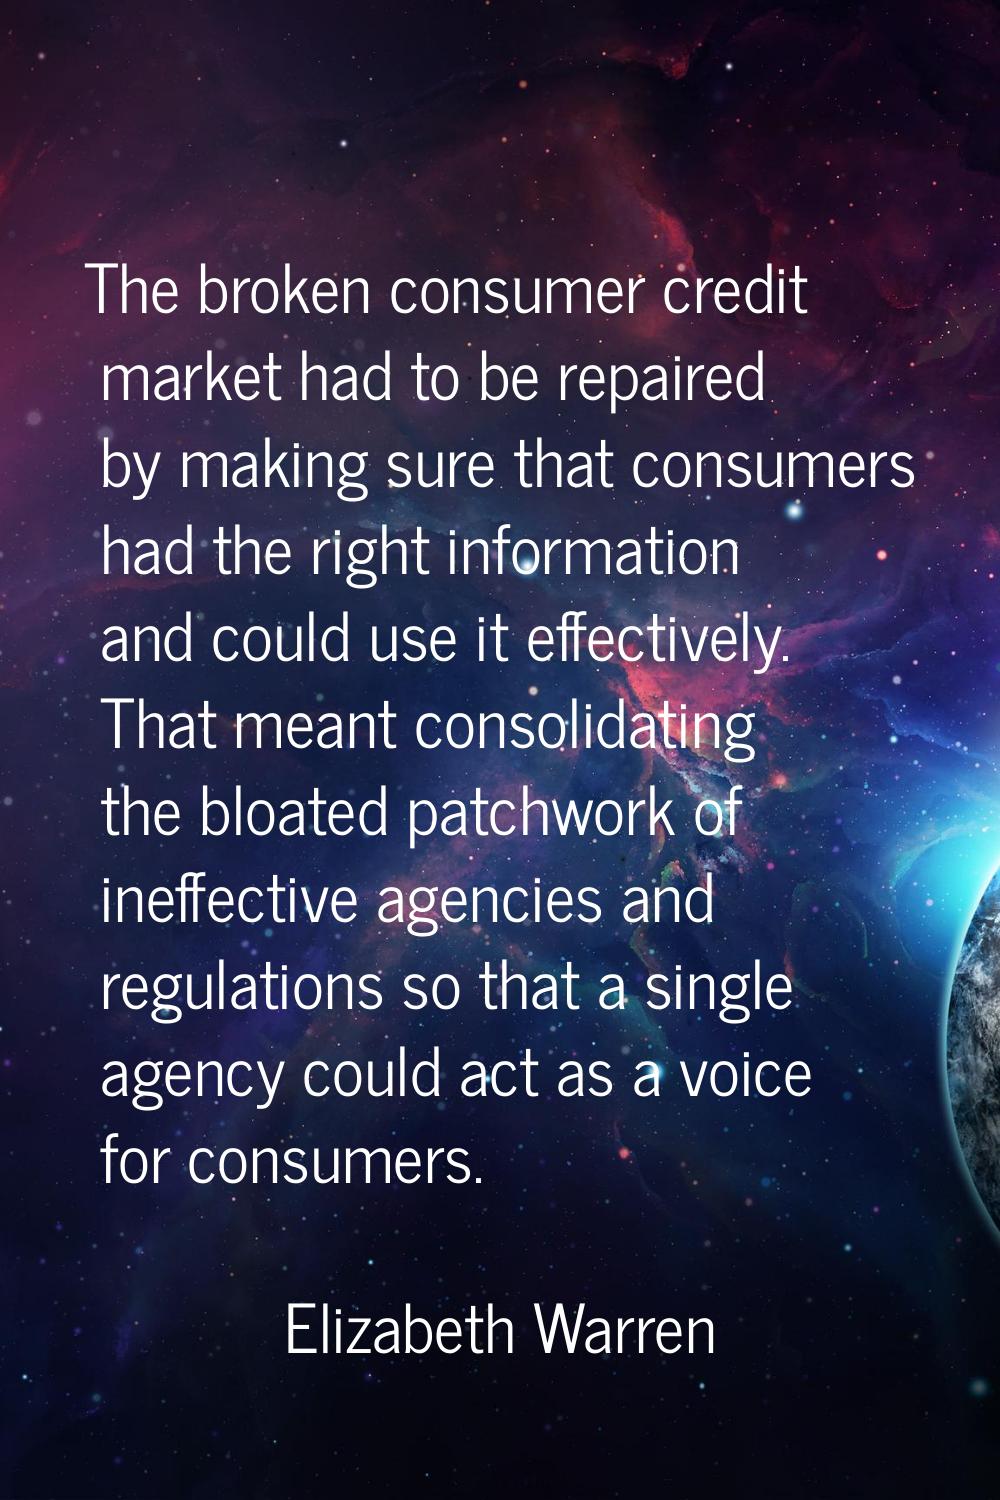 The broken consumer credit market had to be repaired by making sure that consumers had the right in